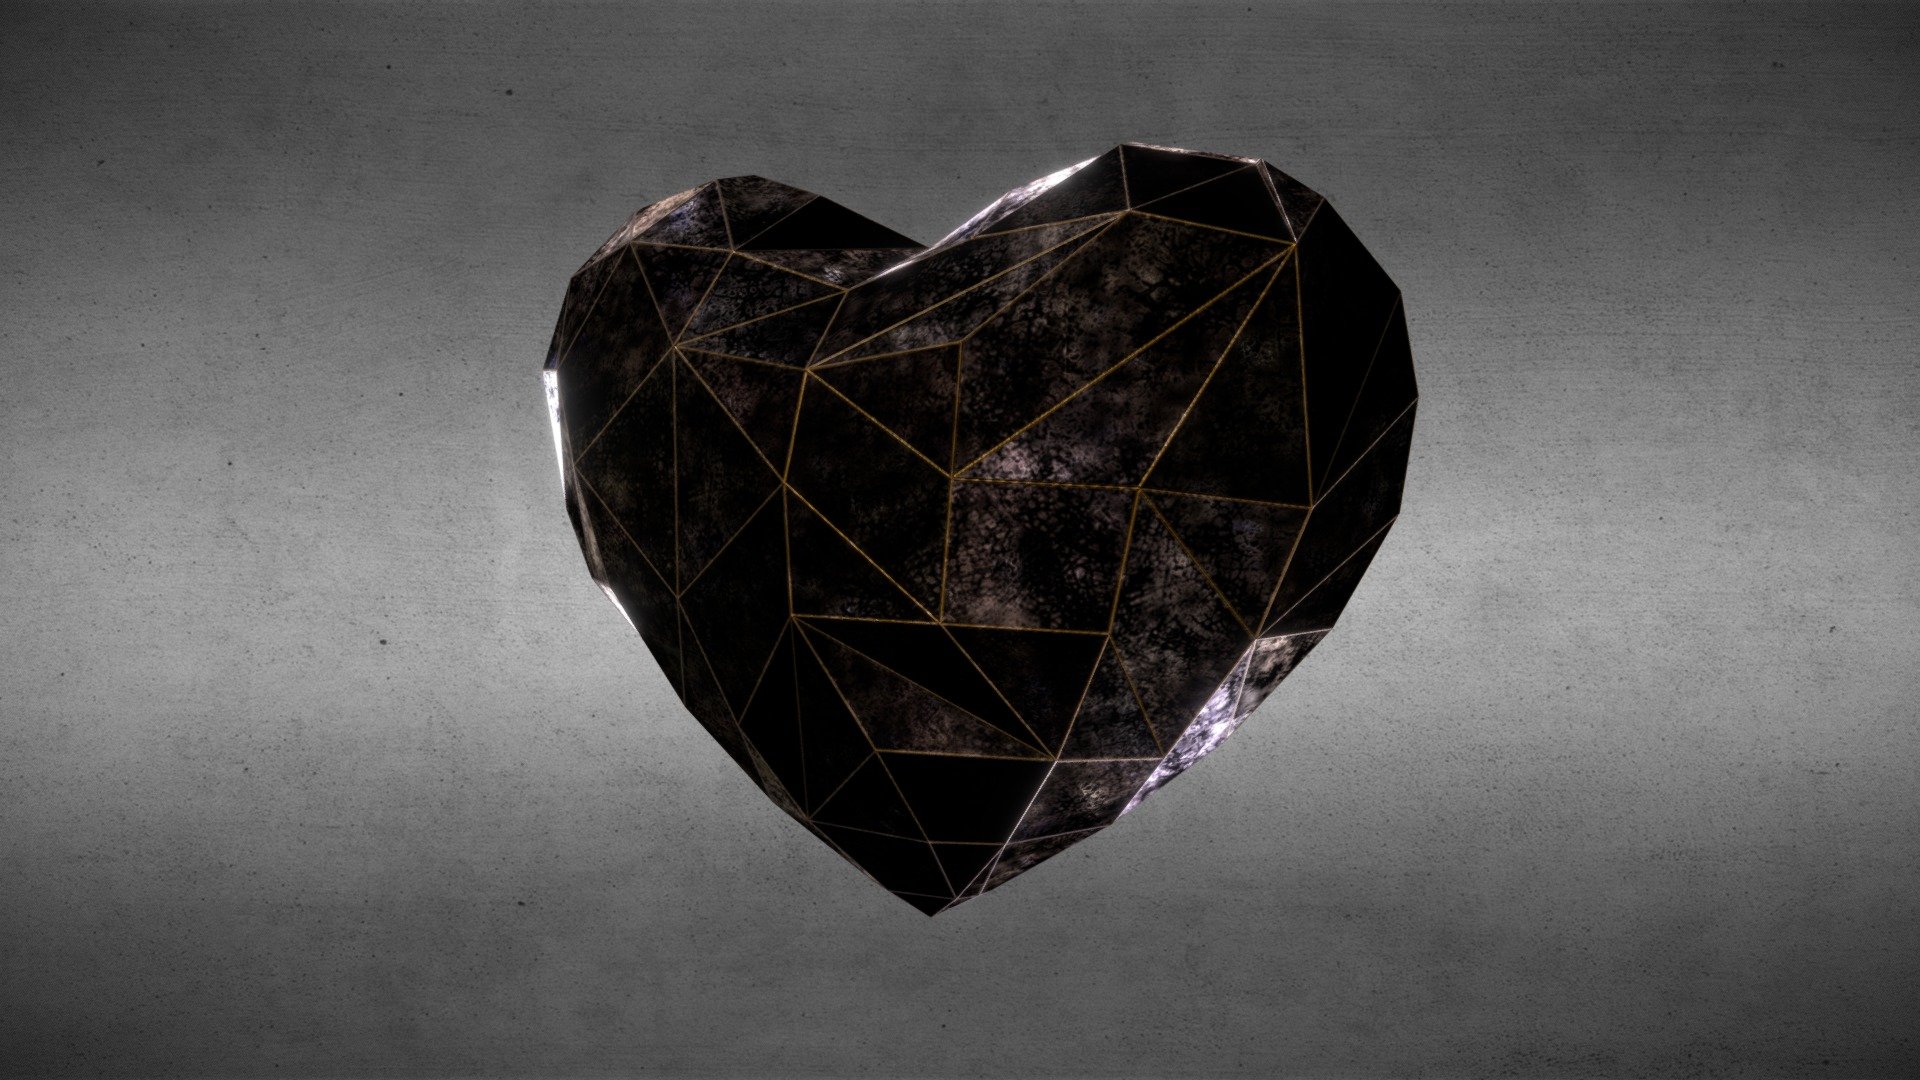 Galaxies Heart
ColorMap + NormalMap 2048x2048
Format FBX file size : 30KB

Click on the link to see more models : https://sketchfab.com/GbehnamG/store

If you need customized 3d models , feel free to contact at: mr.gbehnamg@yahoo.com - Black Crystal Heart - Buy Royalty Free 3D model by BehNaM (@GbehnamG) 3d model